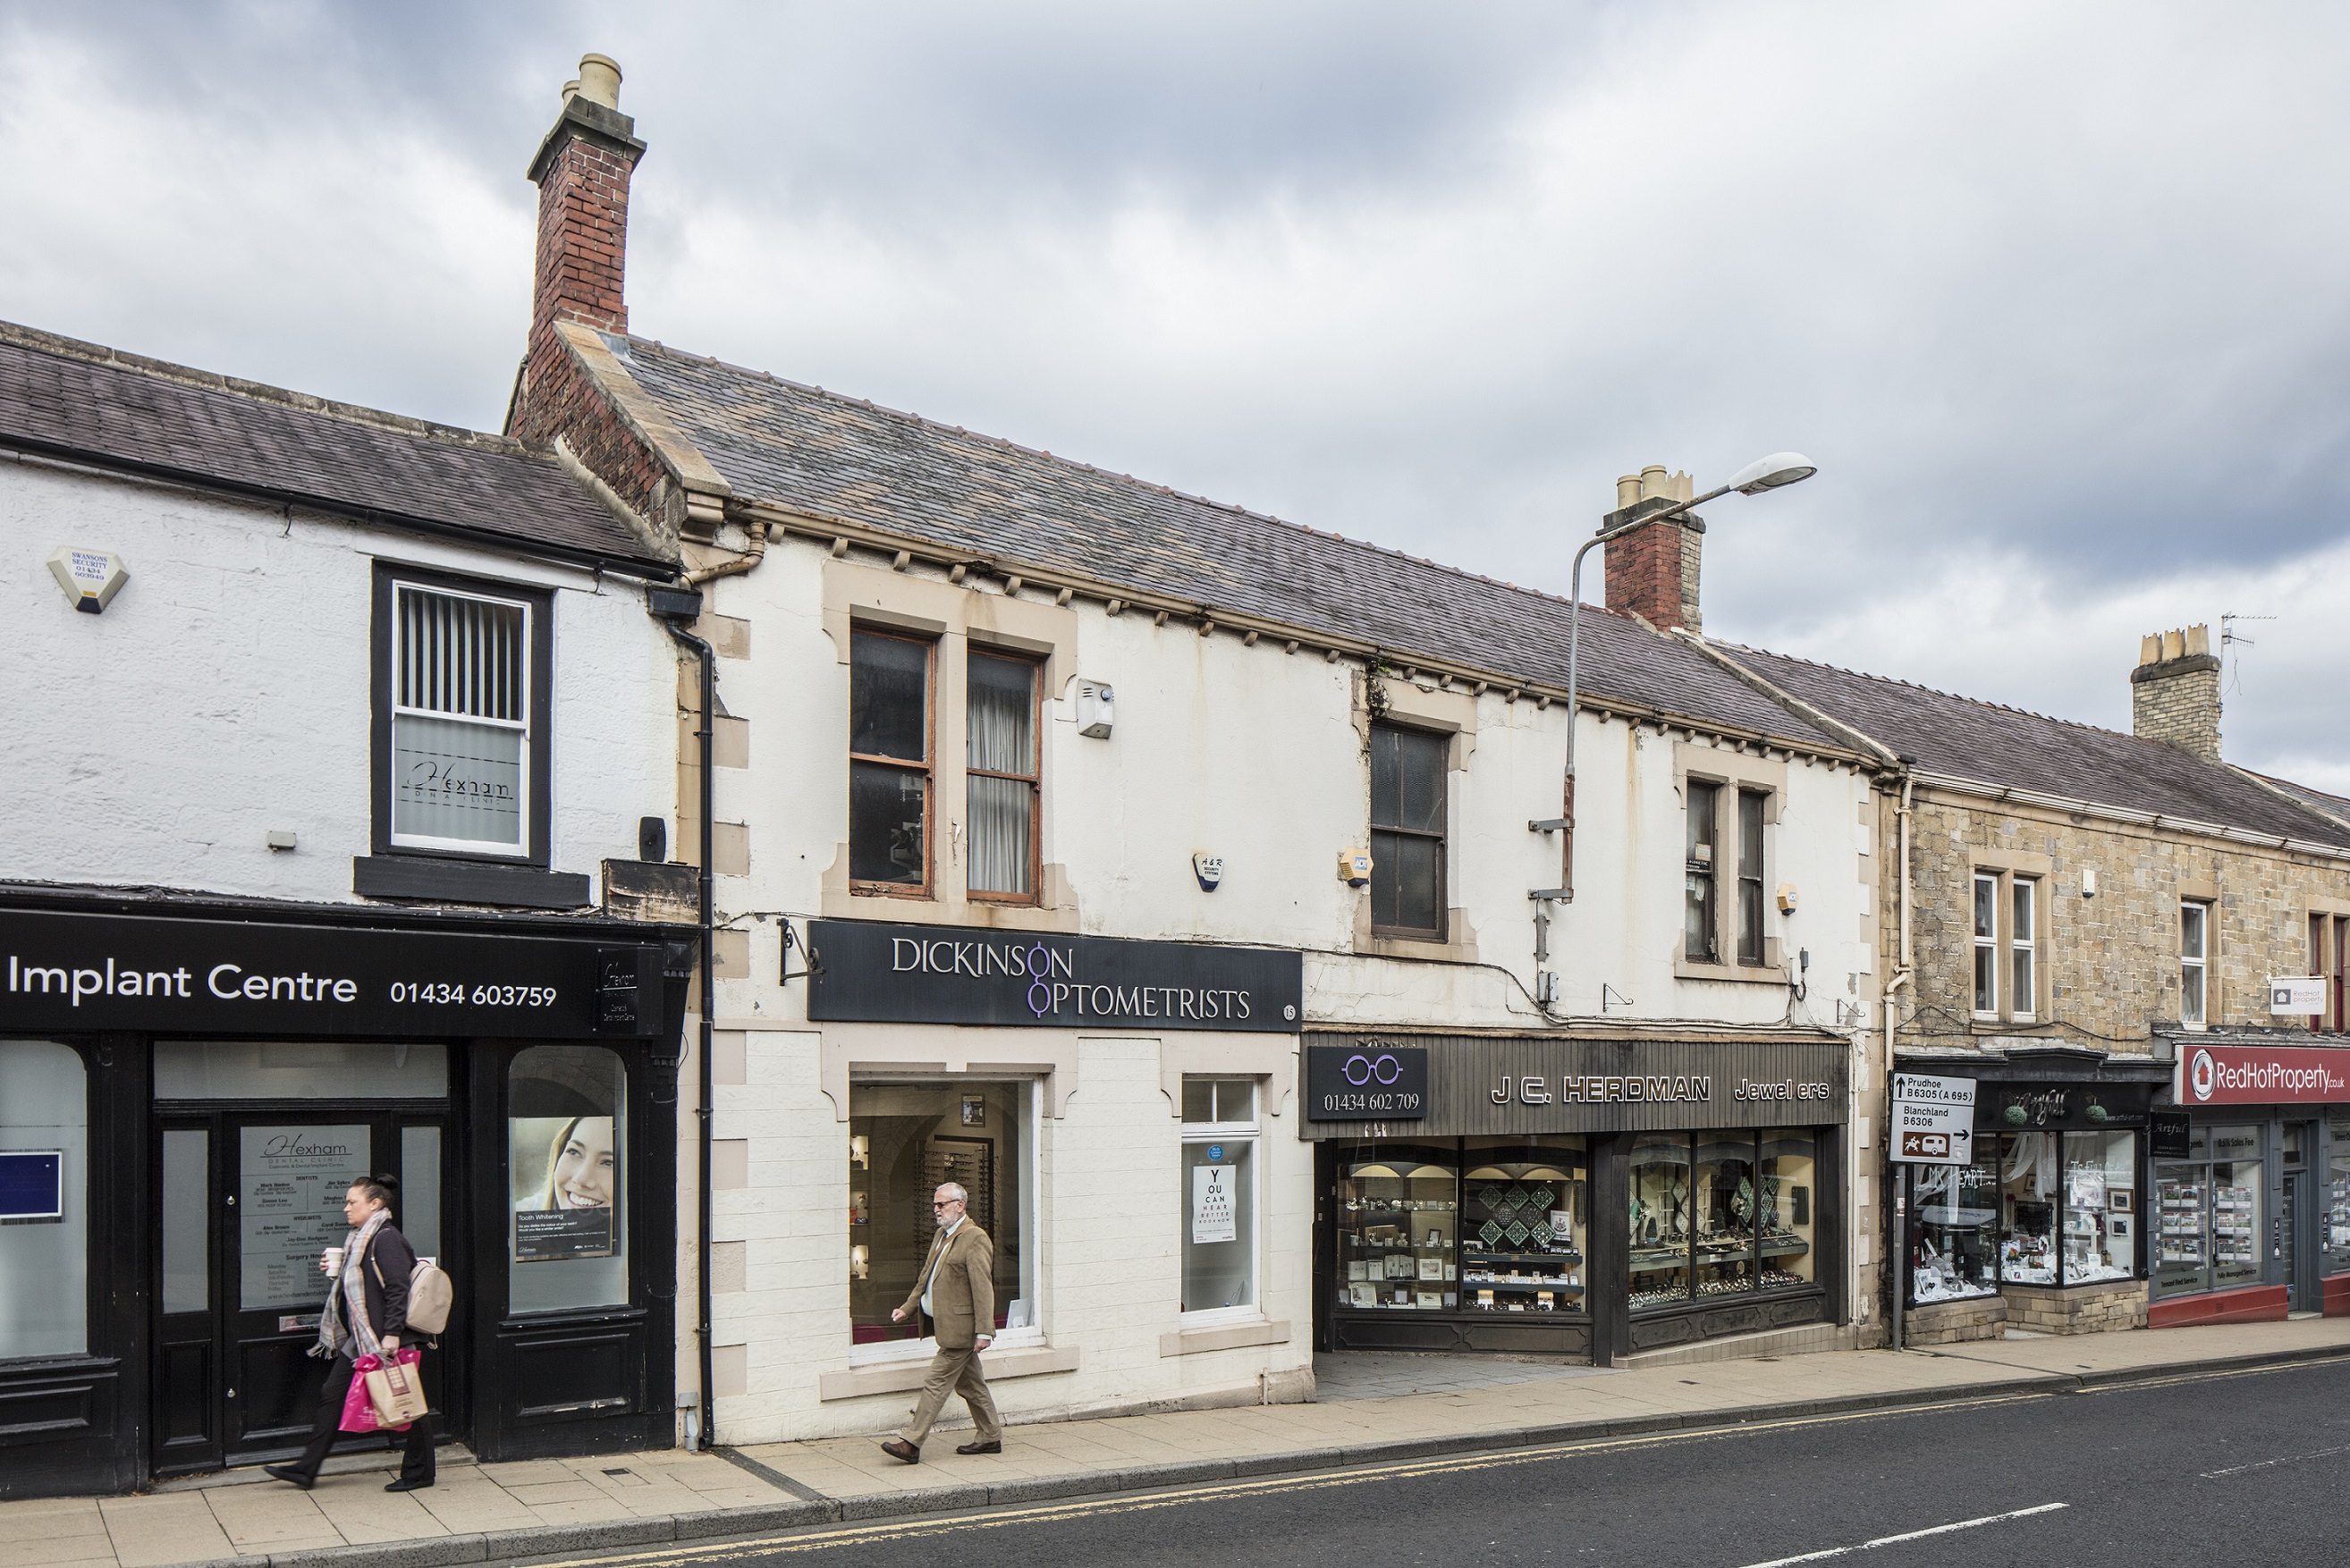 Hexham High Street Heritage Action Zone. 2019.Dickinson Optometrists and J.C.Herdman Jewellers,15 Battle Hill/ Priestpopple, Hexham, Northumberland. View from south east.